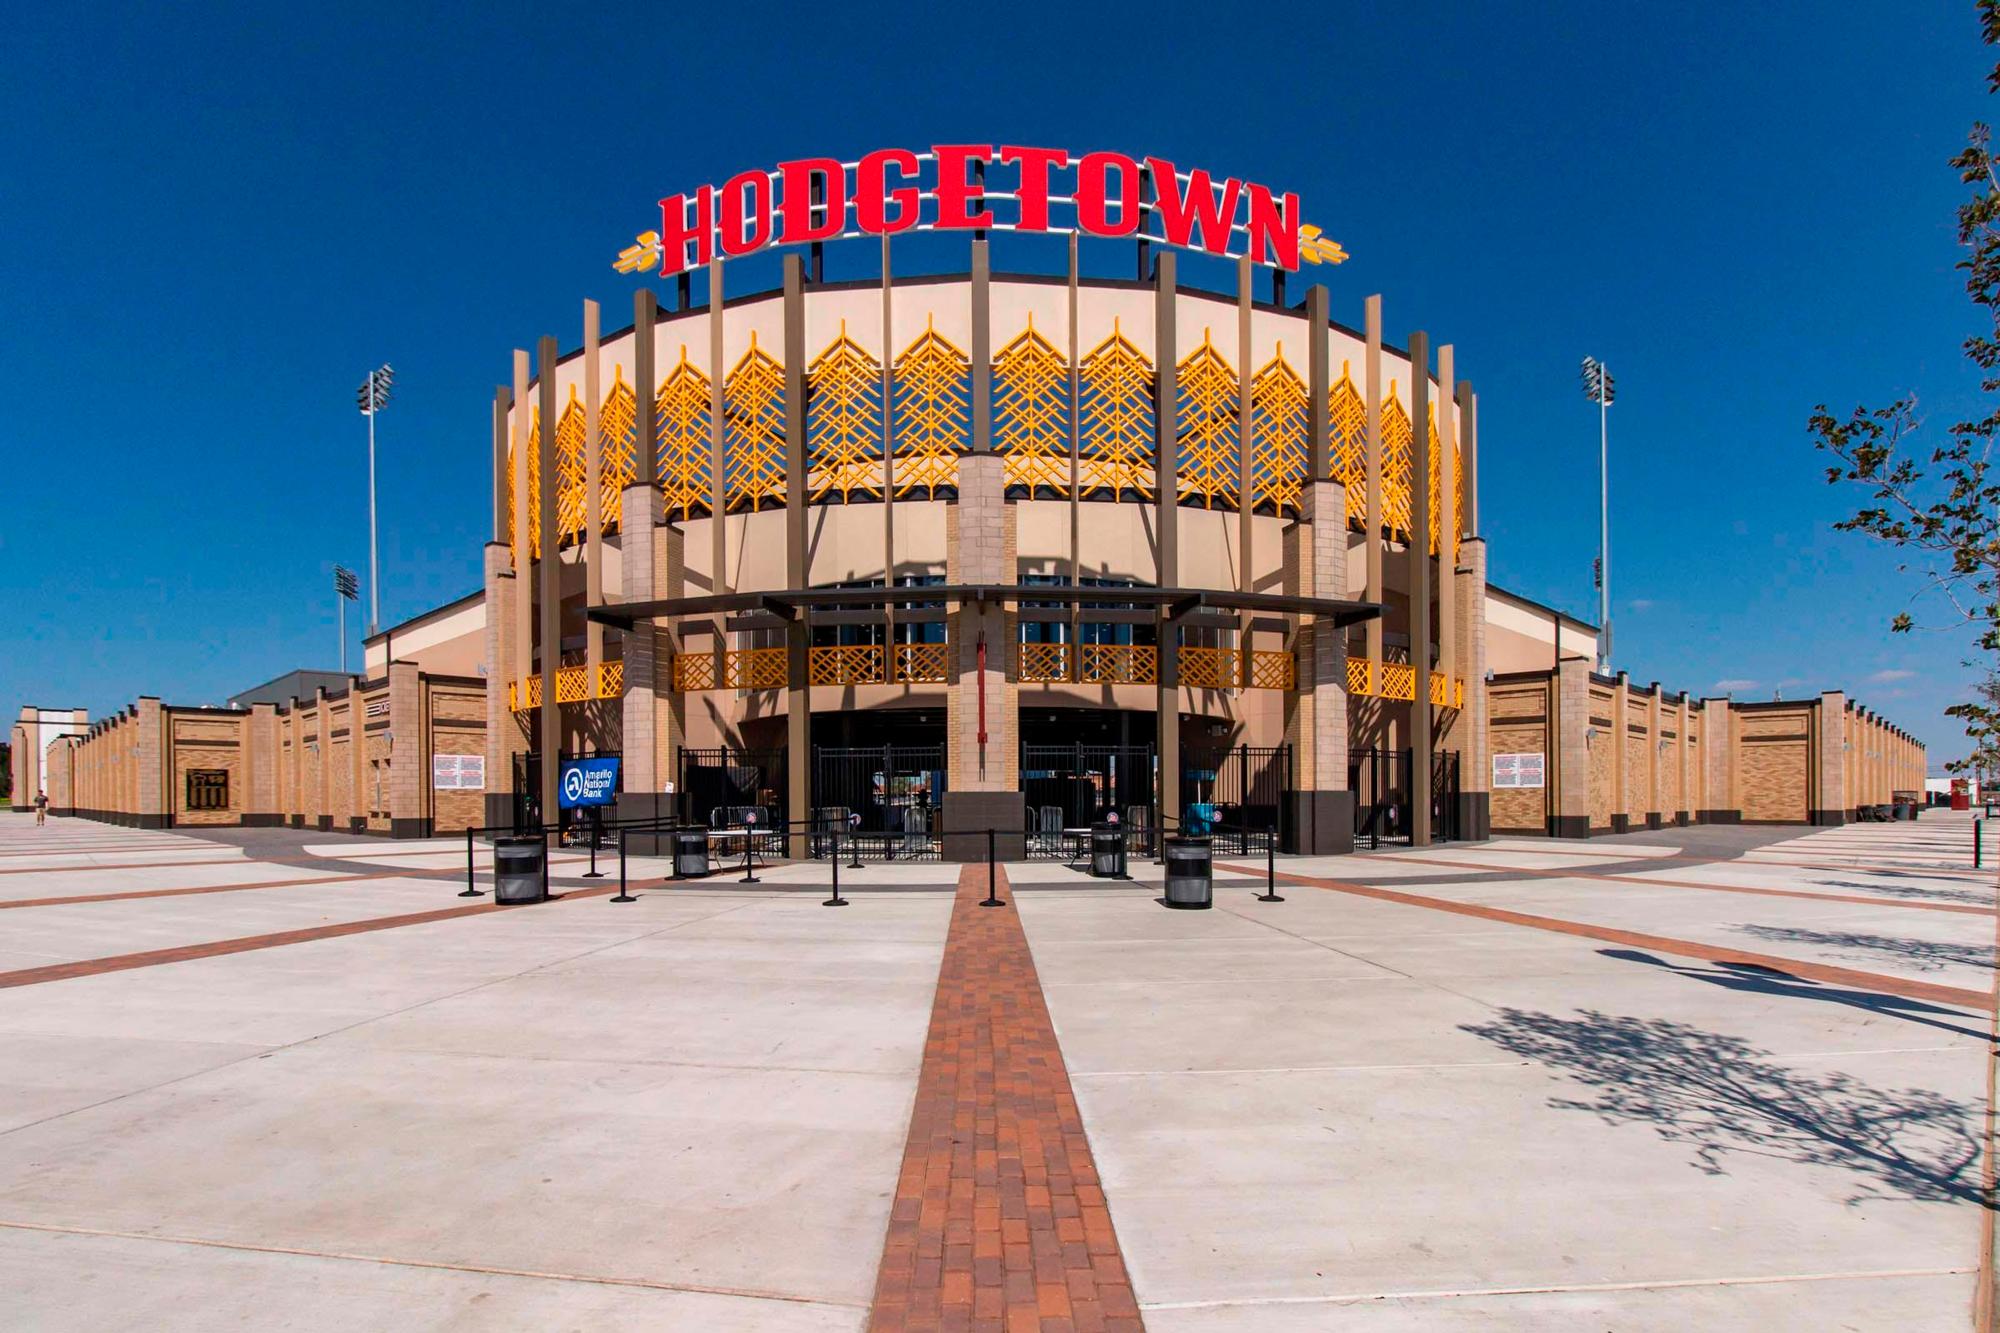 The exterior of Hodgetown; paved brick walkways lead to a coliseum style brick building with a sign atop: "Hodgetown"